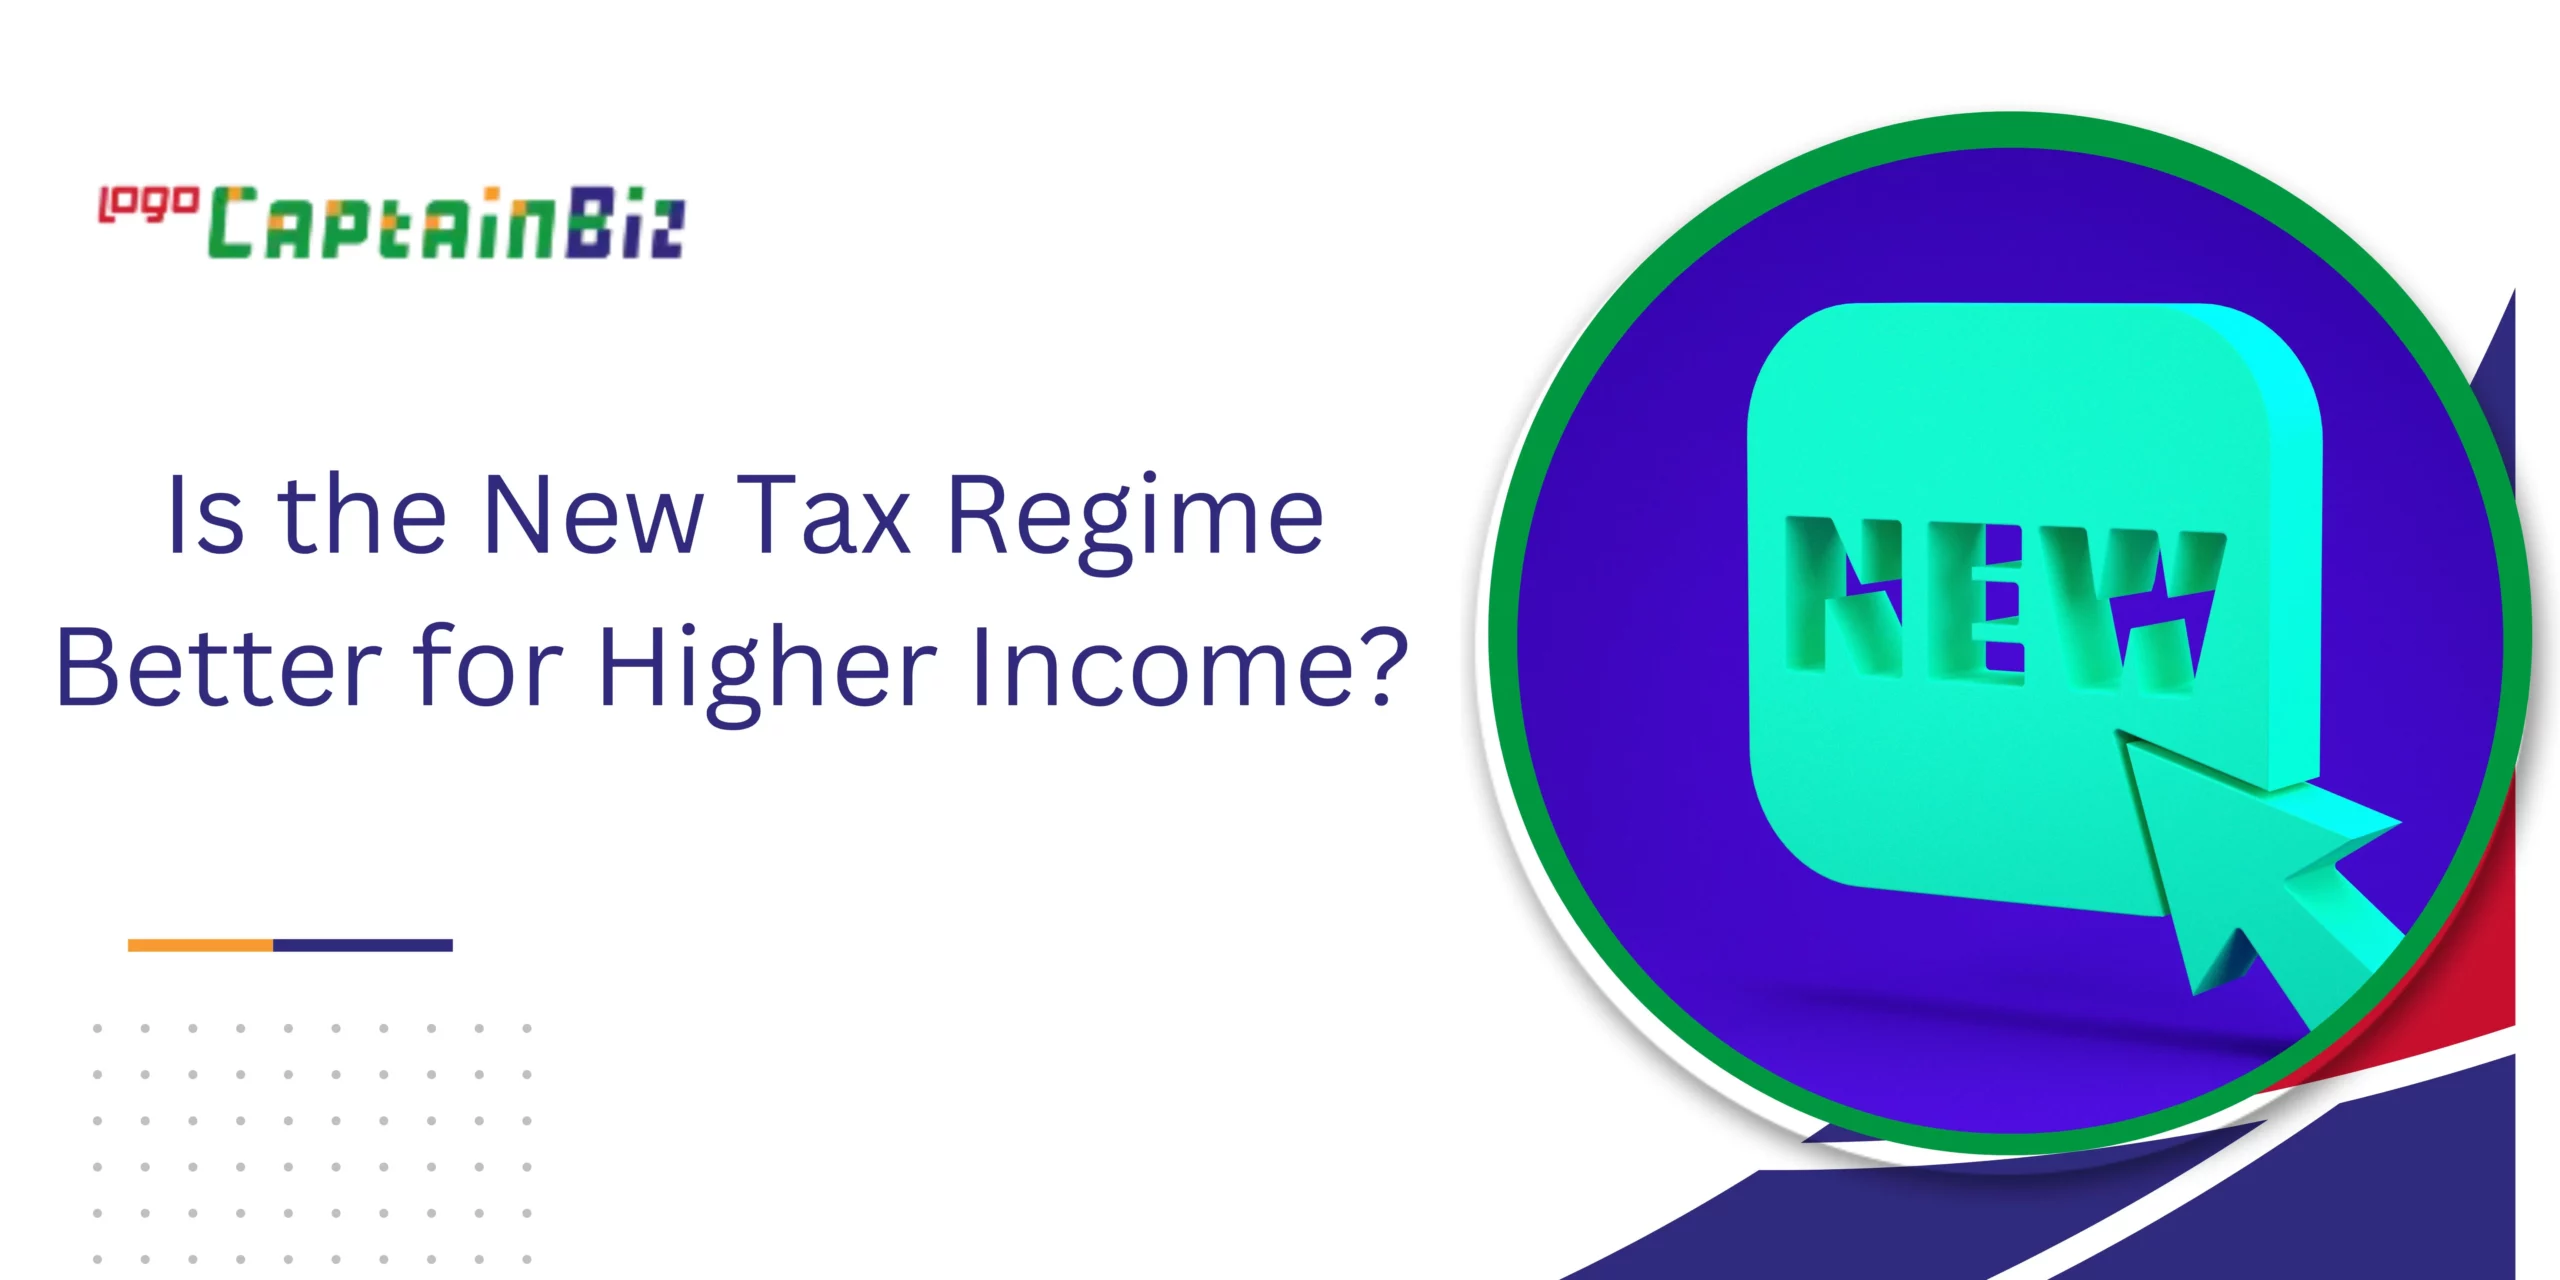 CaptainBiz: Is the New Tax Regime Better for Higher Income